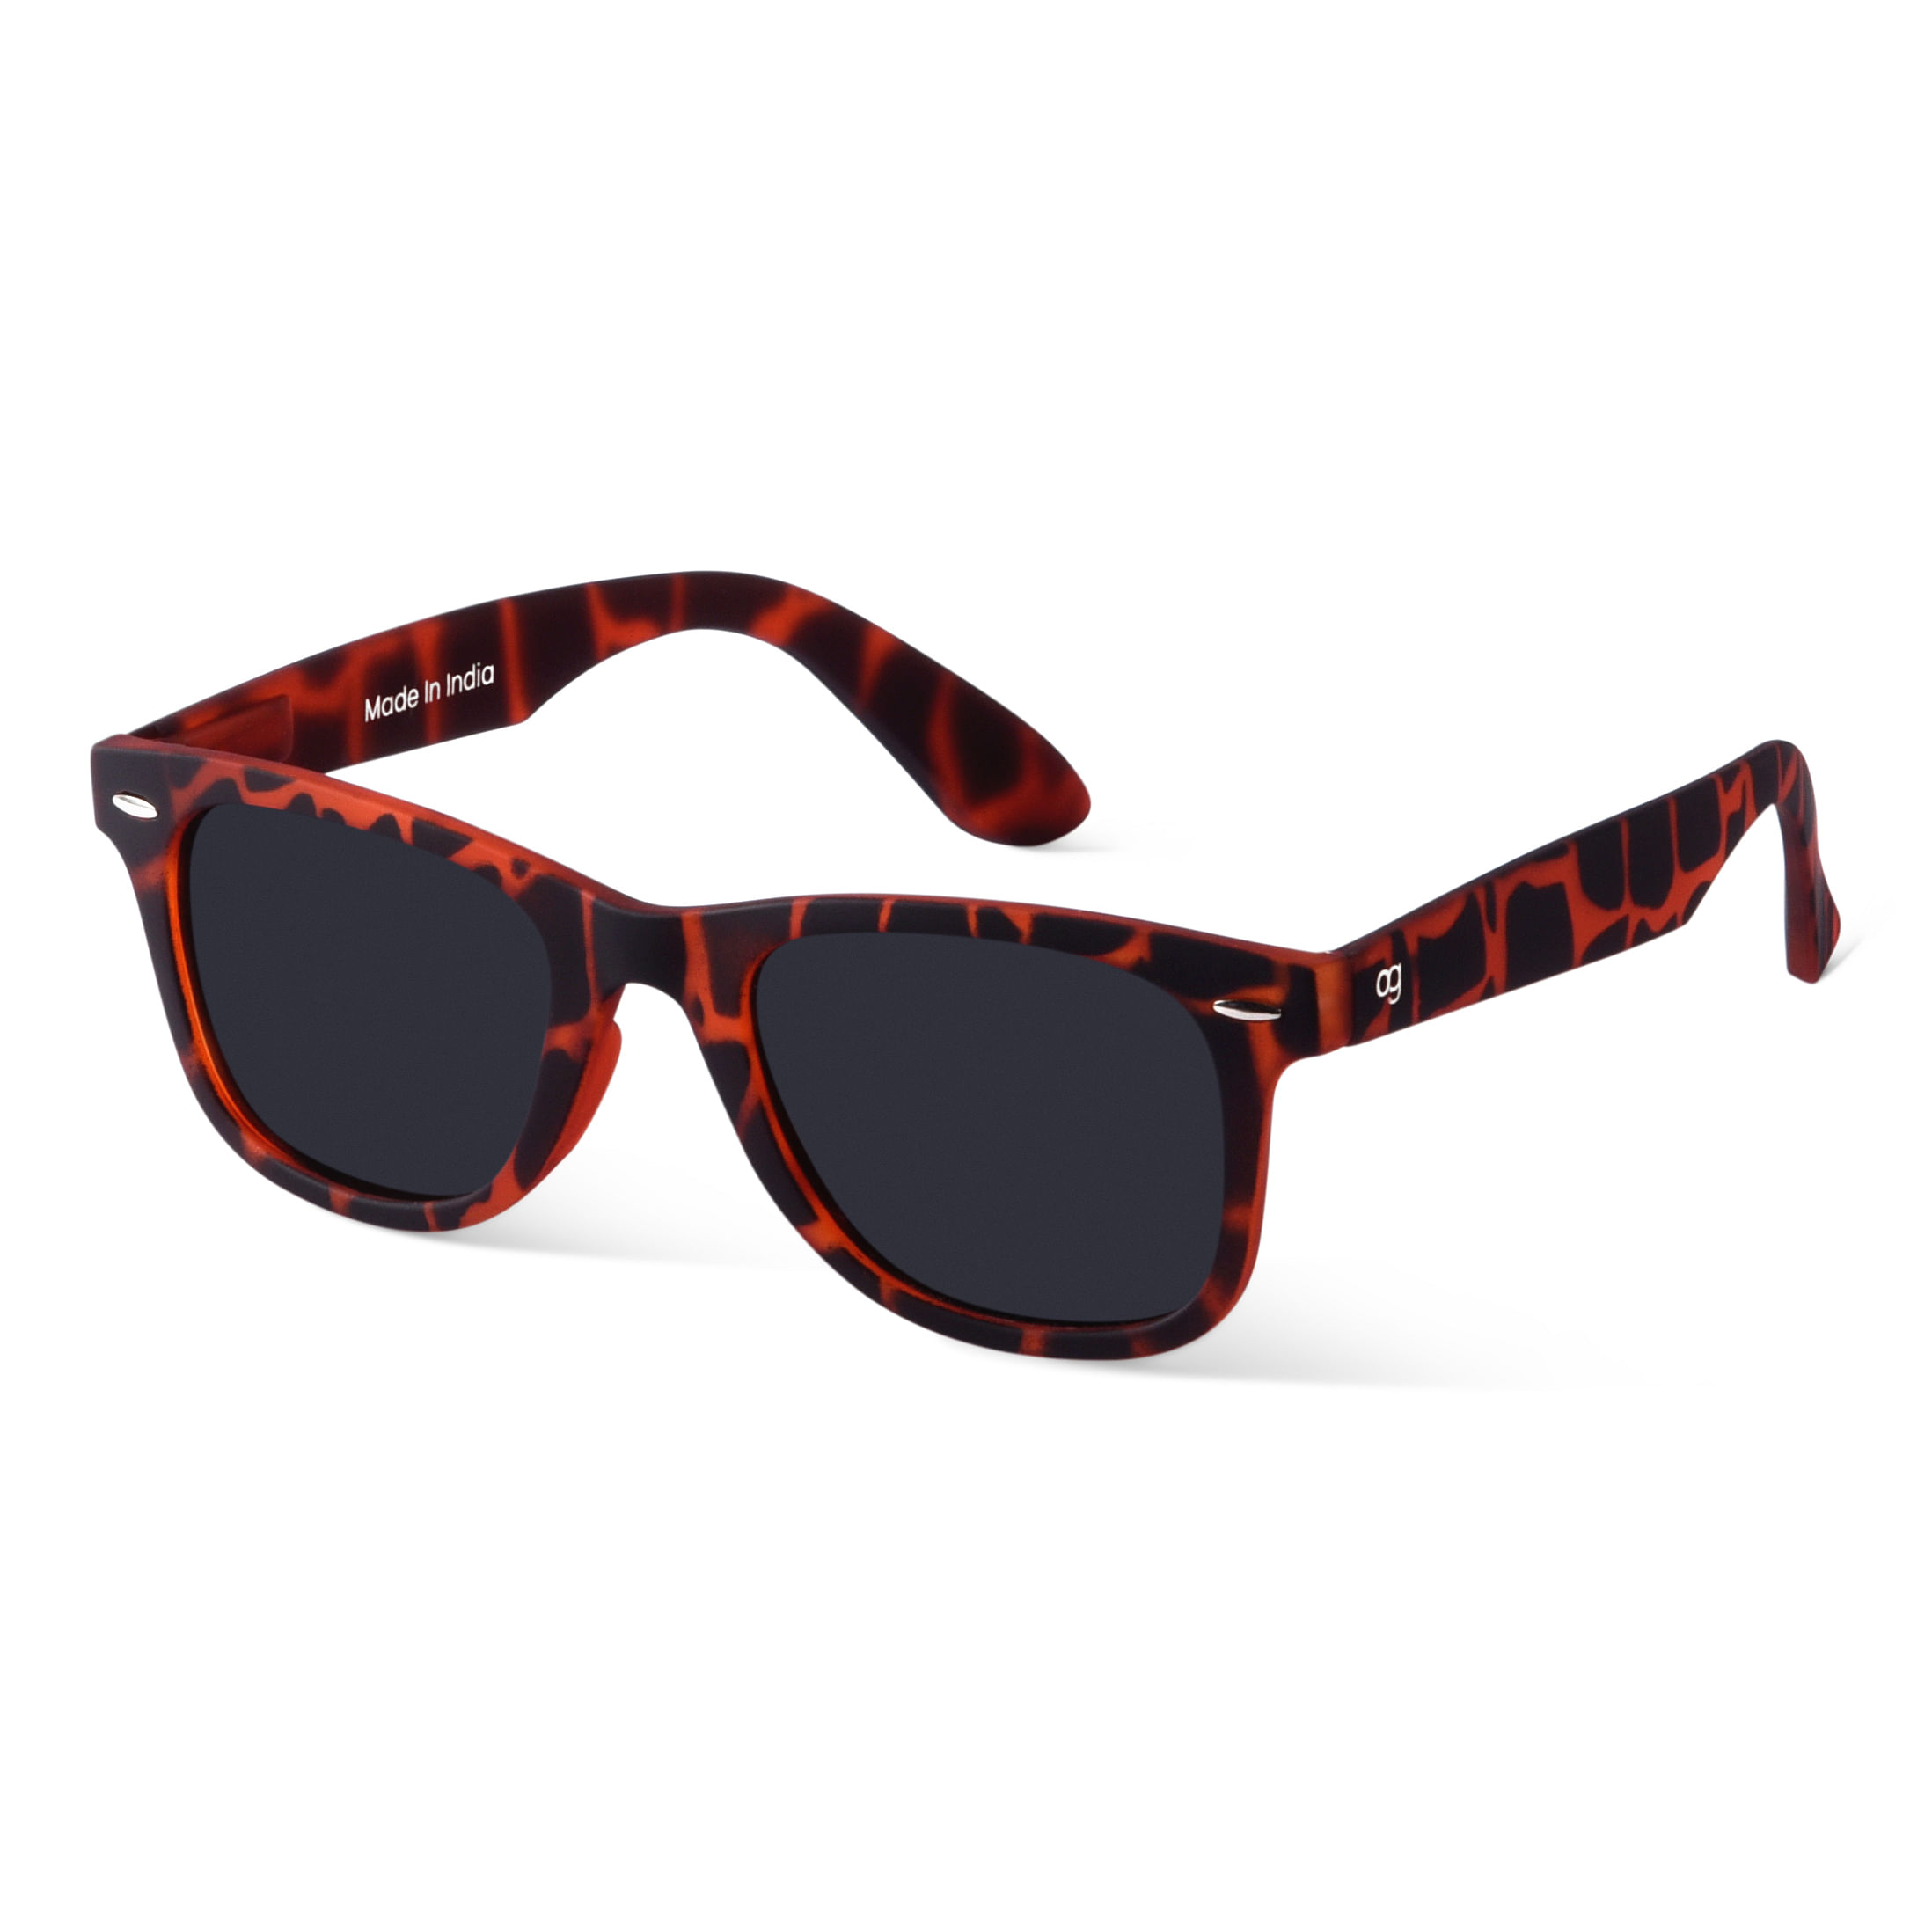 In The Shade Sunglasses | Shop At Vans